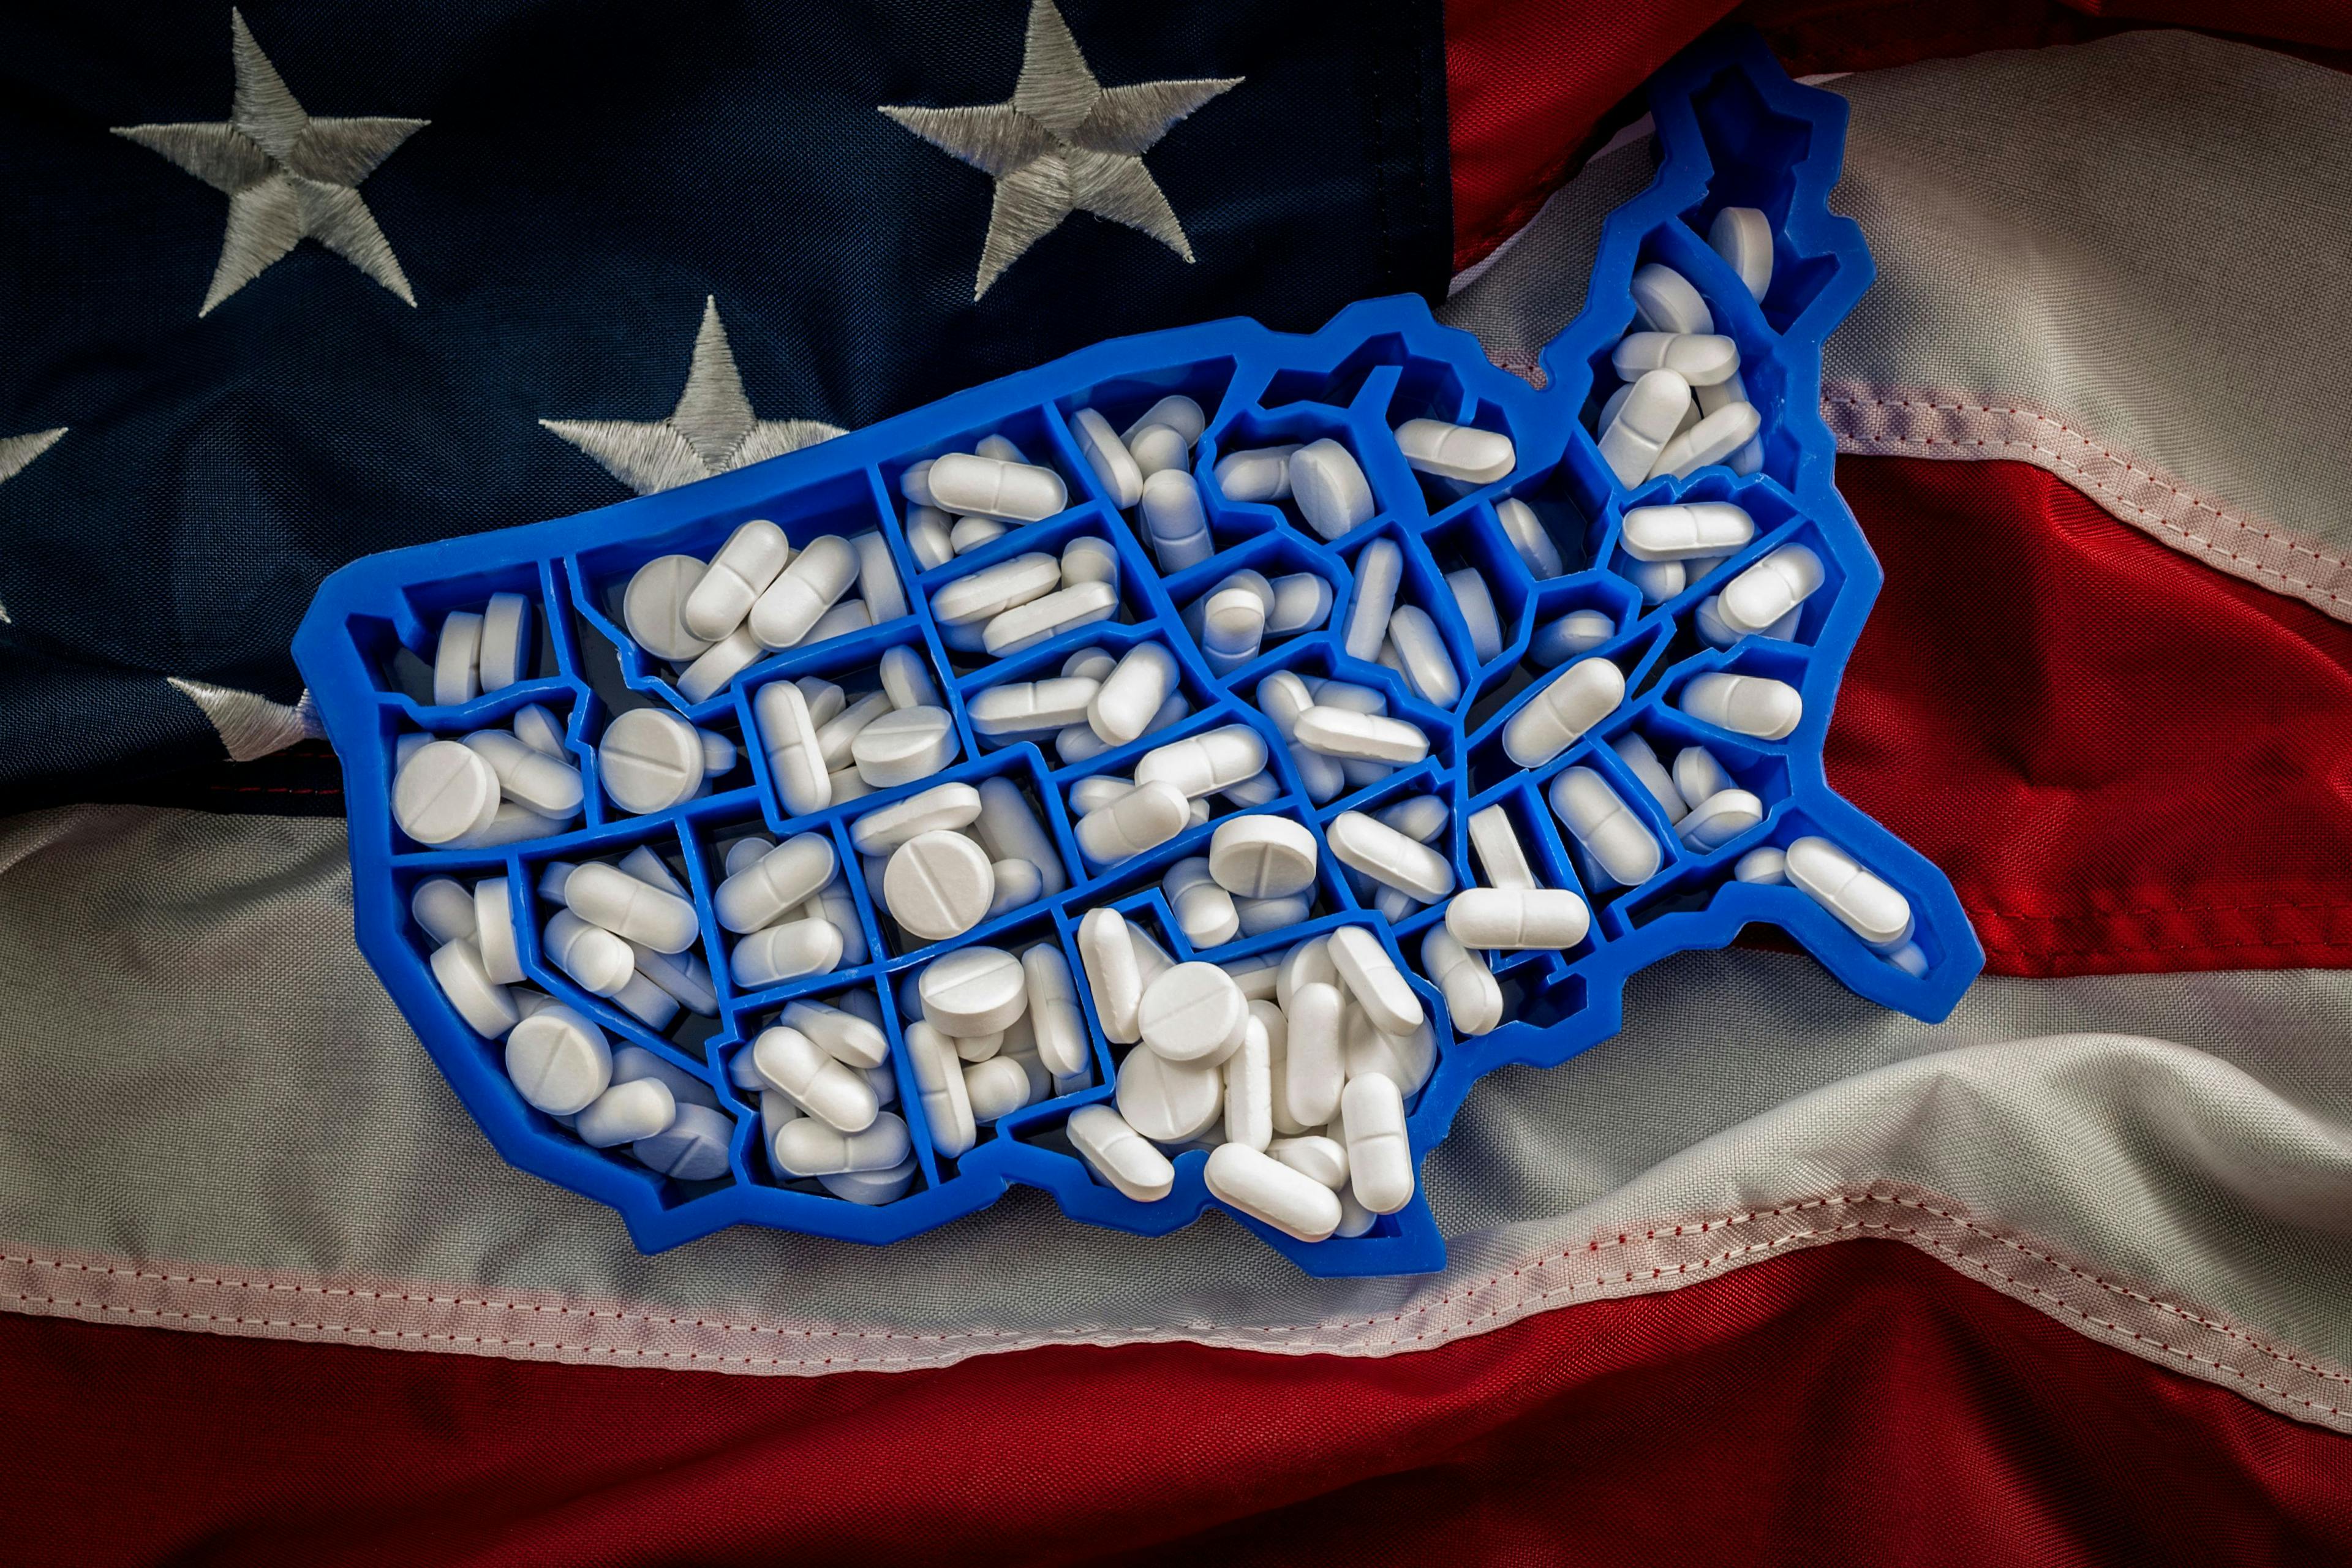 Map of the US filled with pills / Victor Moussa - stock.adobe.com